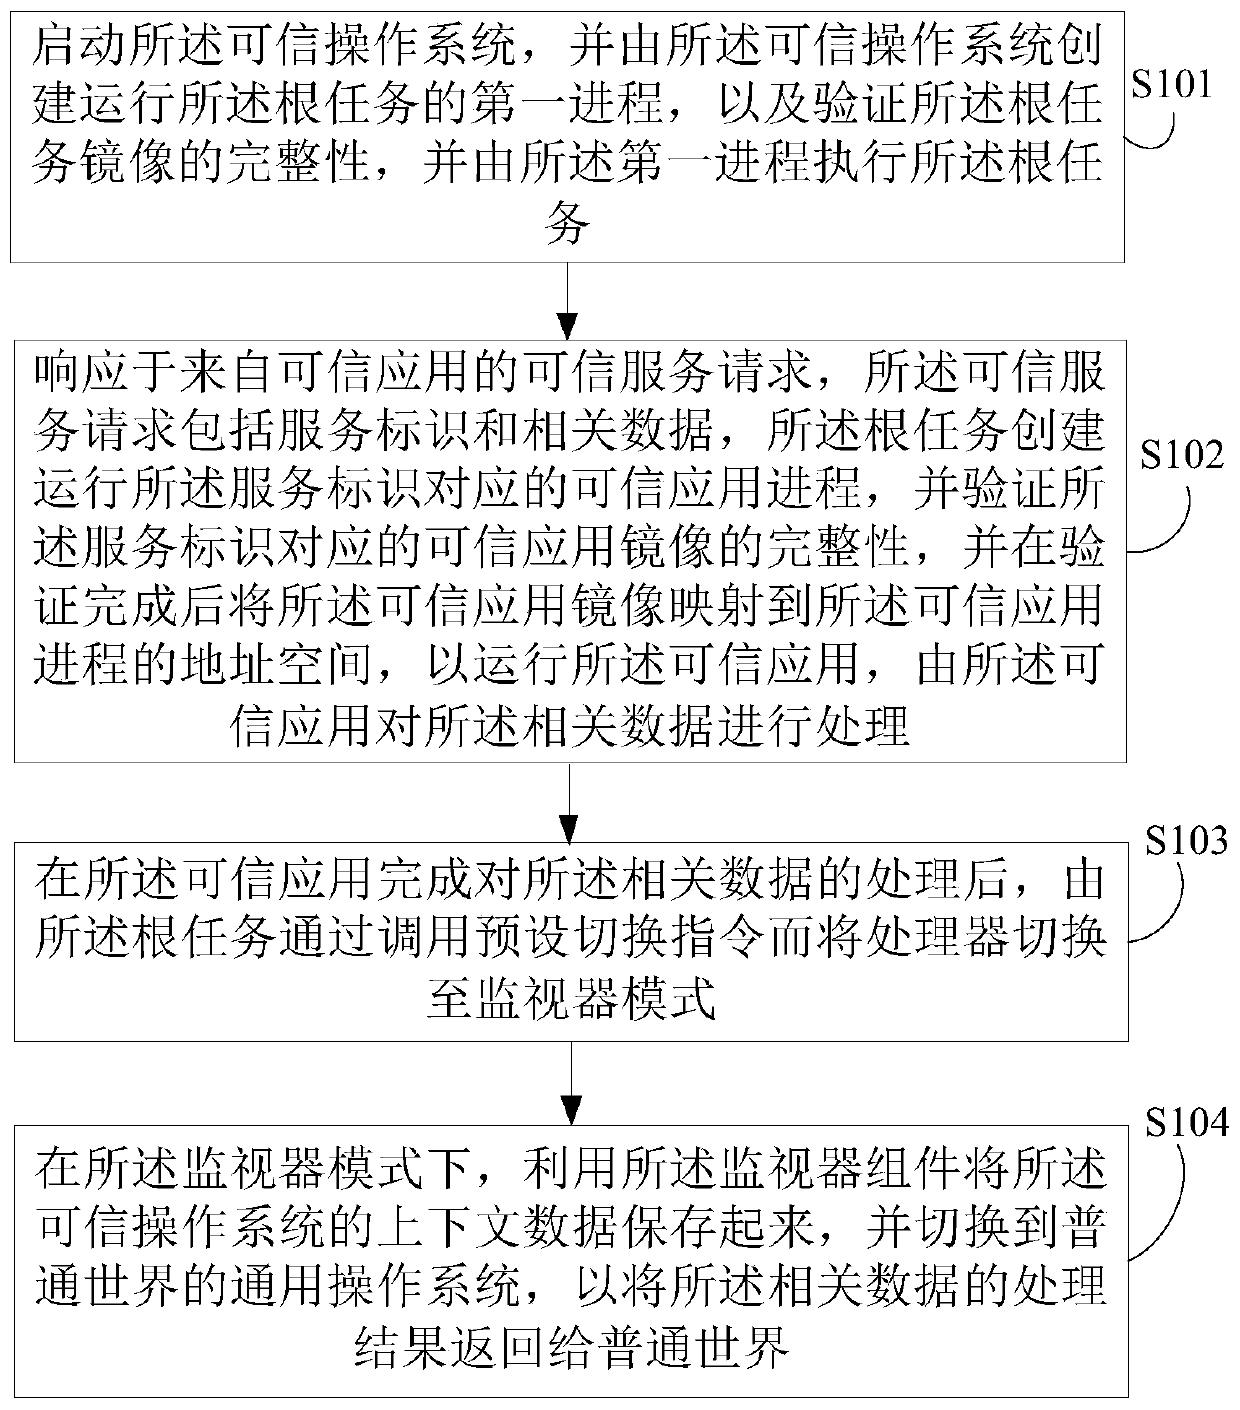 Method for providing trusted services using trusted execution environment system